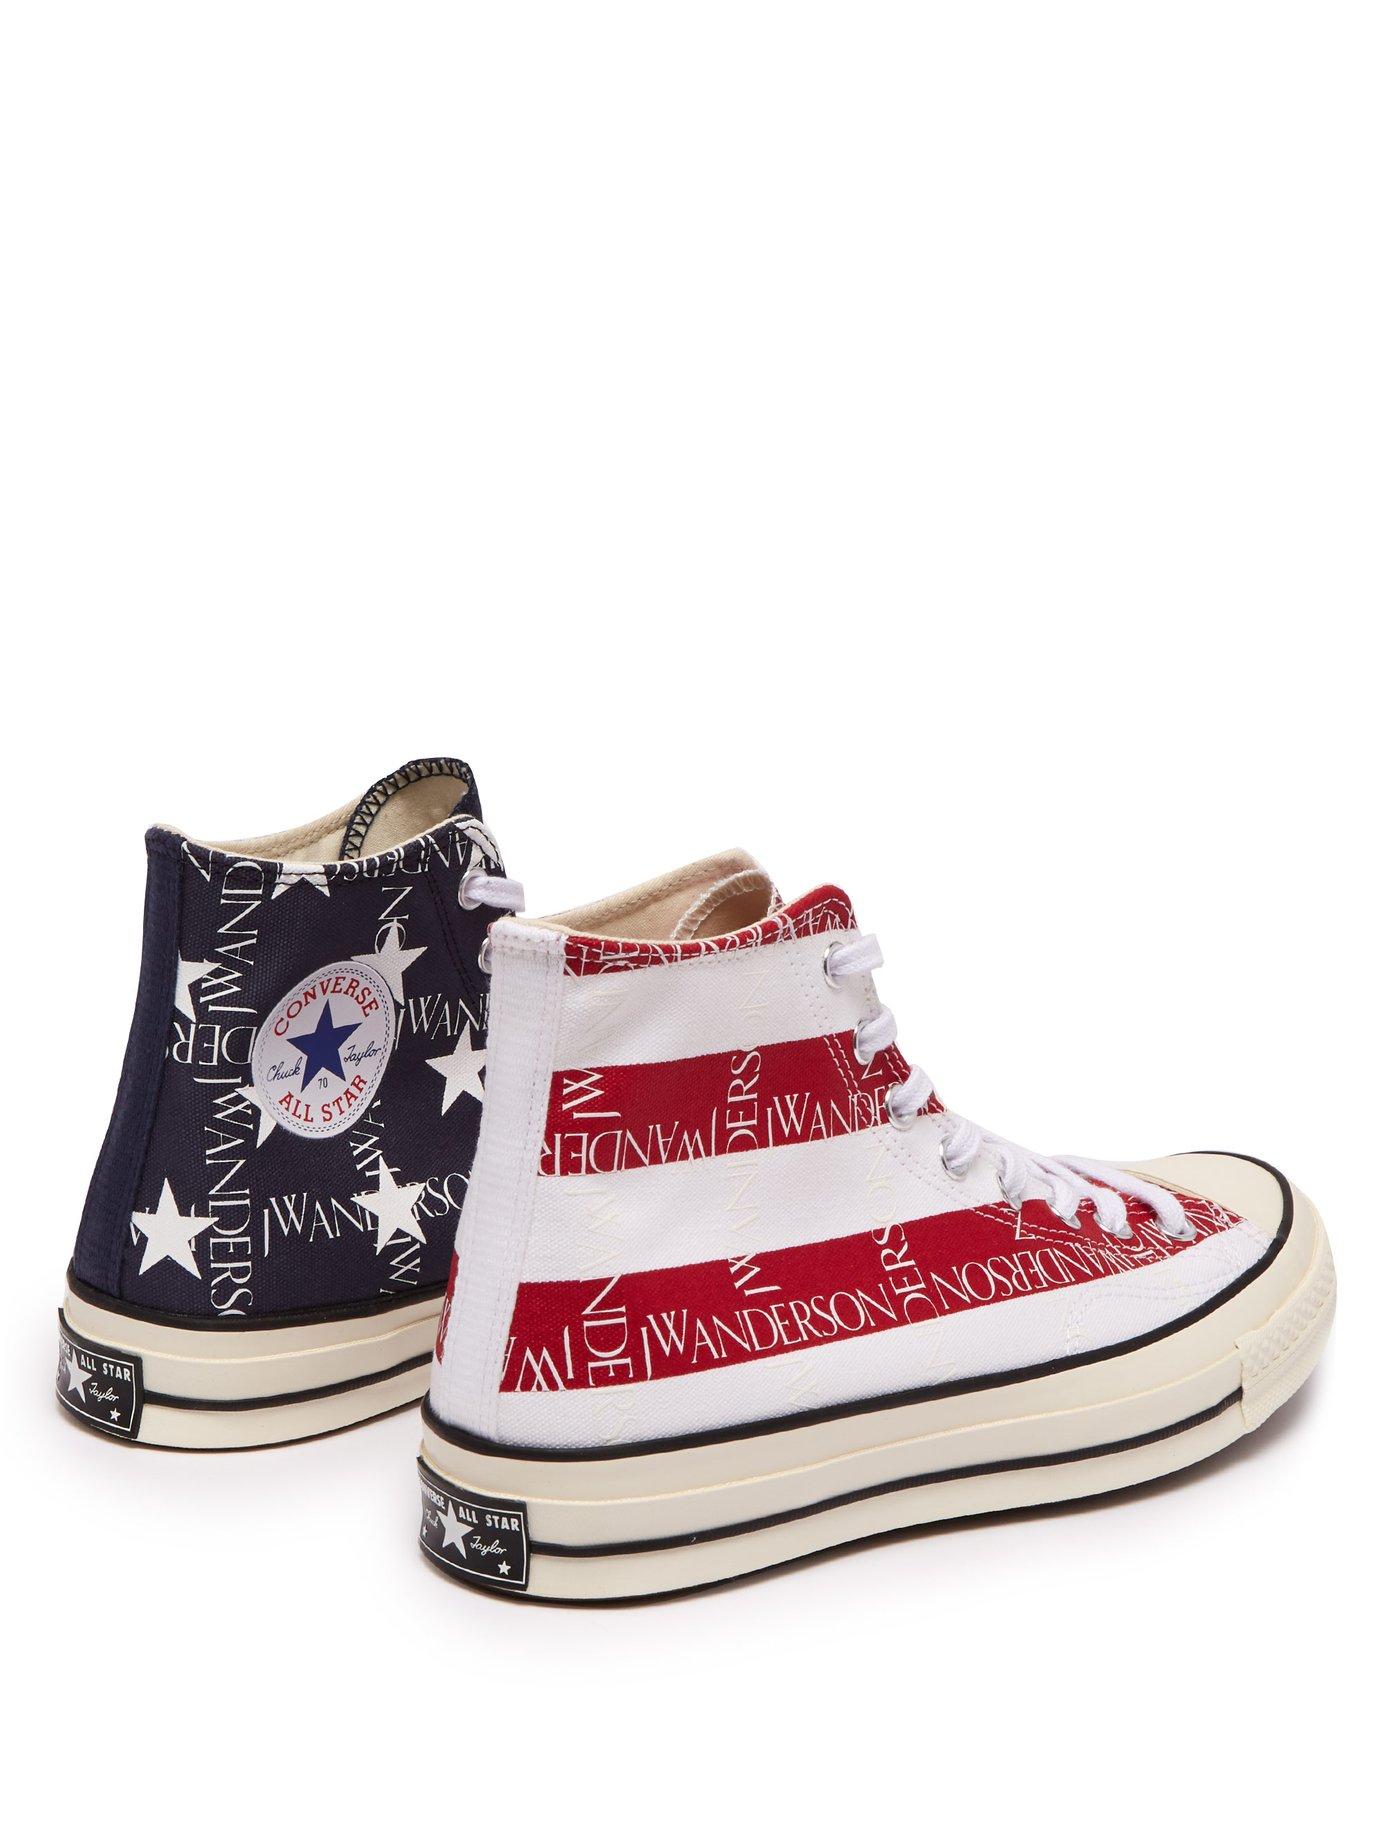 converse all star stars and stripes